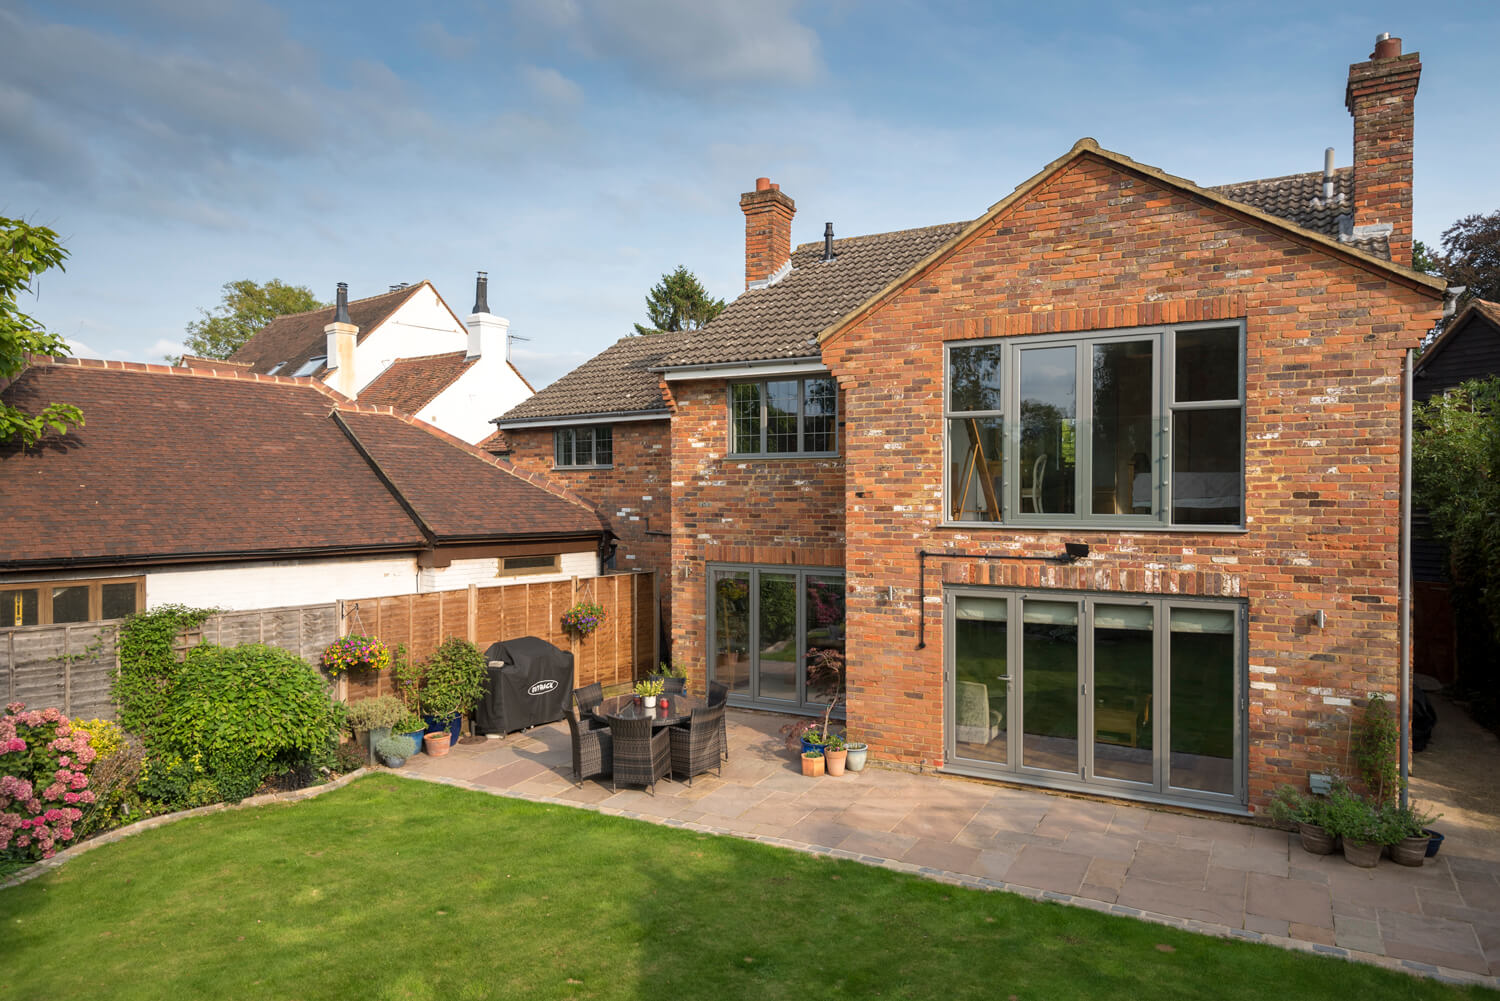 Why Should You Choose Homestyle for Your Next Double Glazing Project?